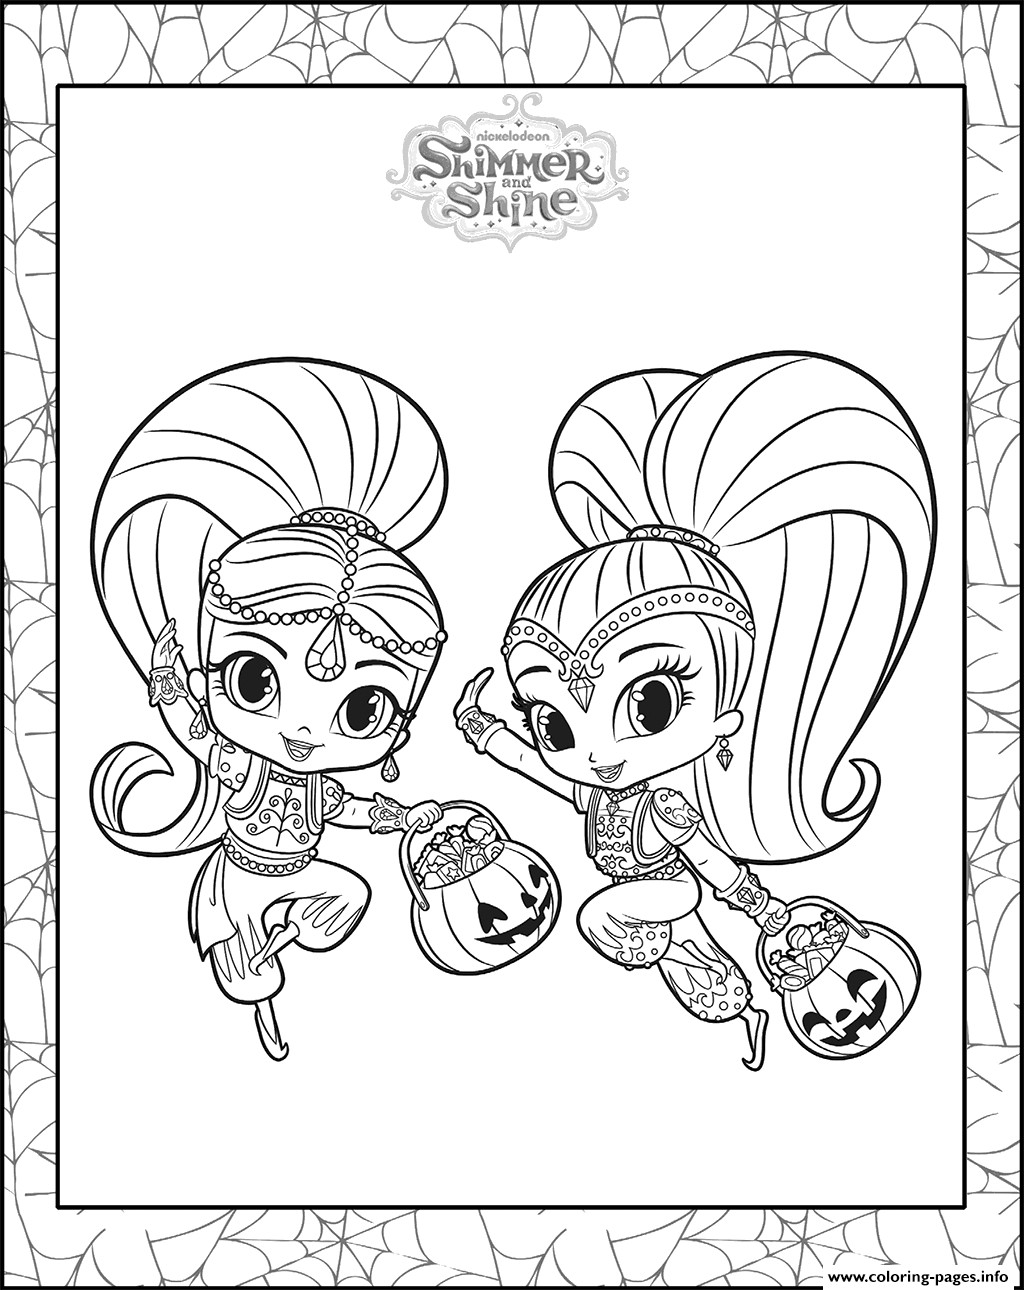 Free Printable Coloring Sheets Of Shine For Jesus Pumpkin
 Shimmer And Shine Halloween Coloring Pack Coloring Pages